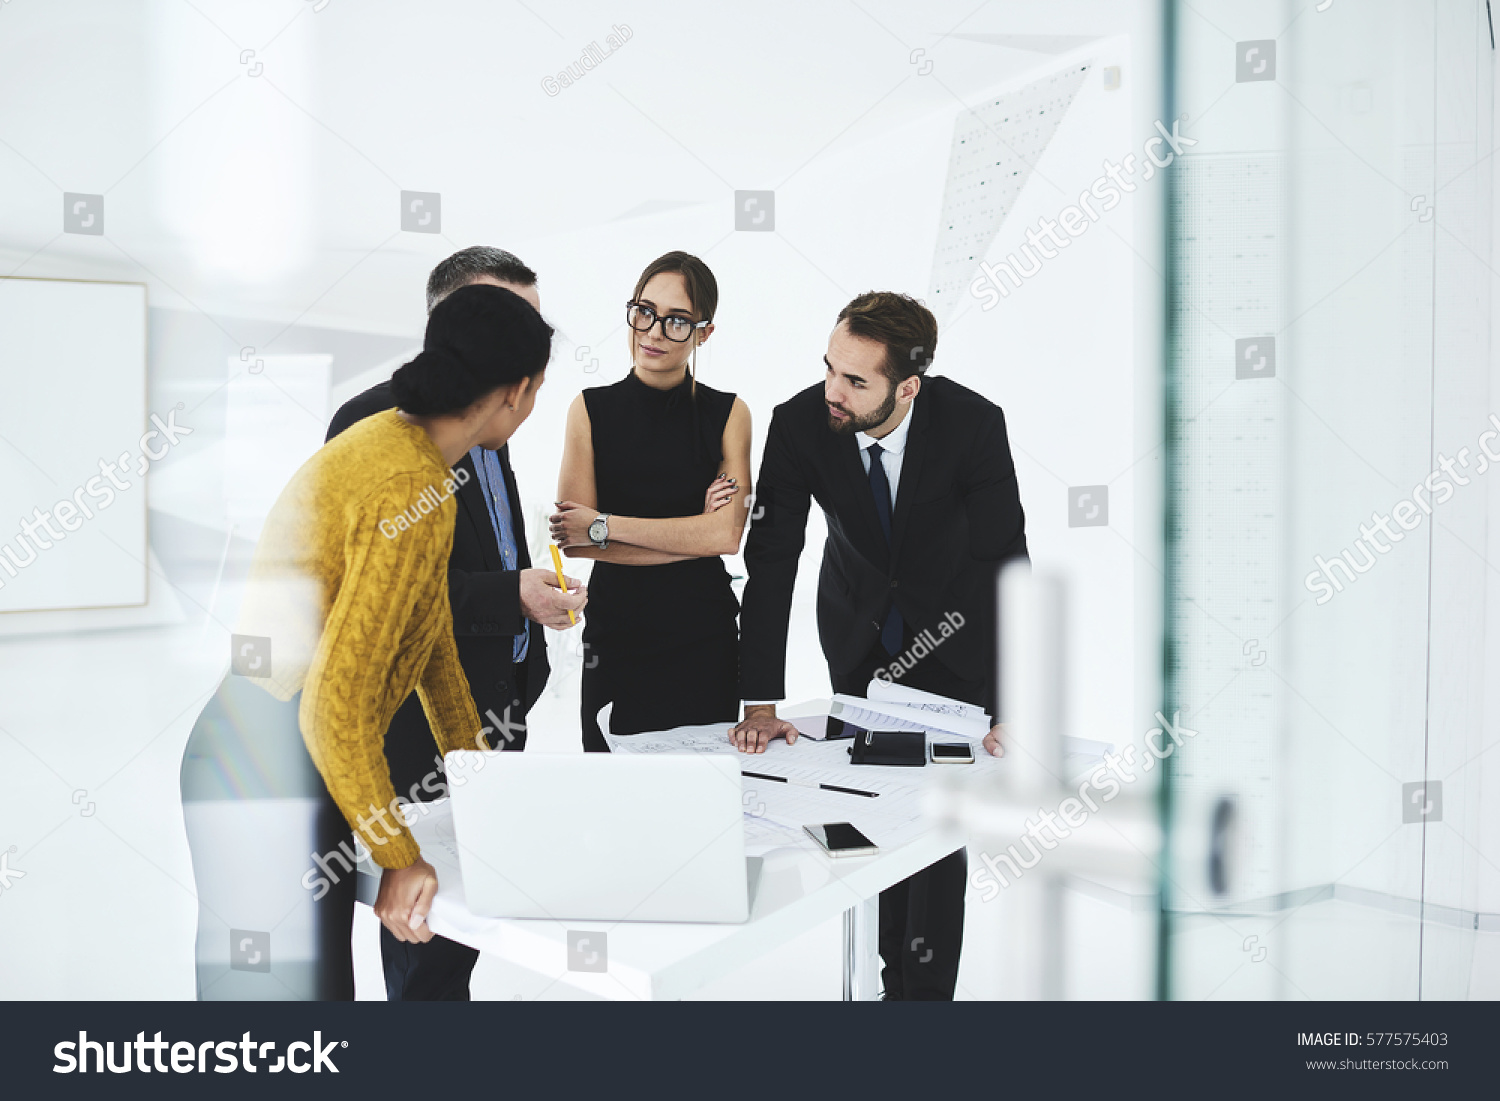 Crew of skilled marketing experts consulting with executive about rebranding of corporation suggesting new advertising campaign to change style sharing opinions on formal meeting in conference hall #577575403